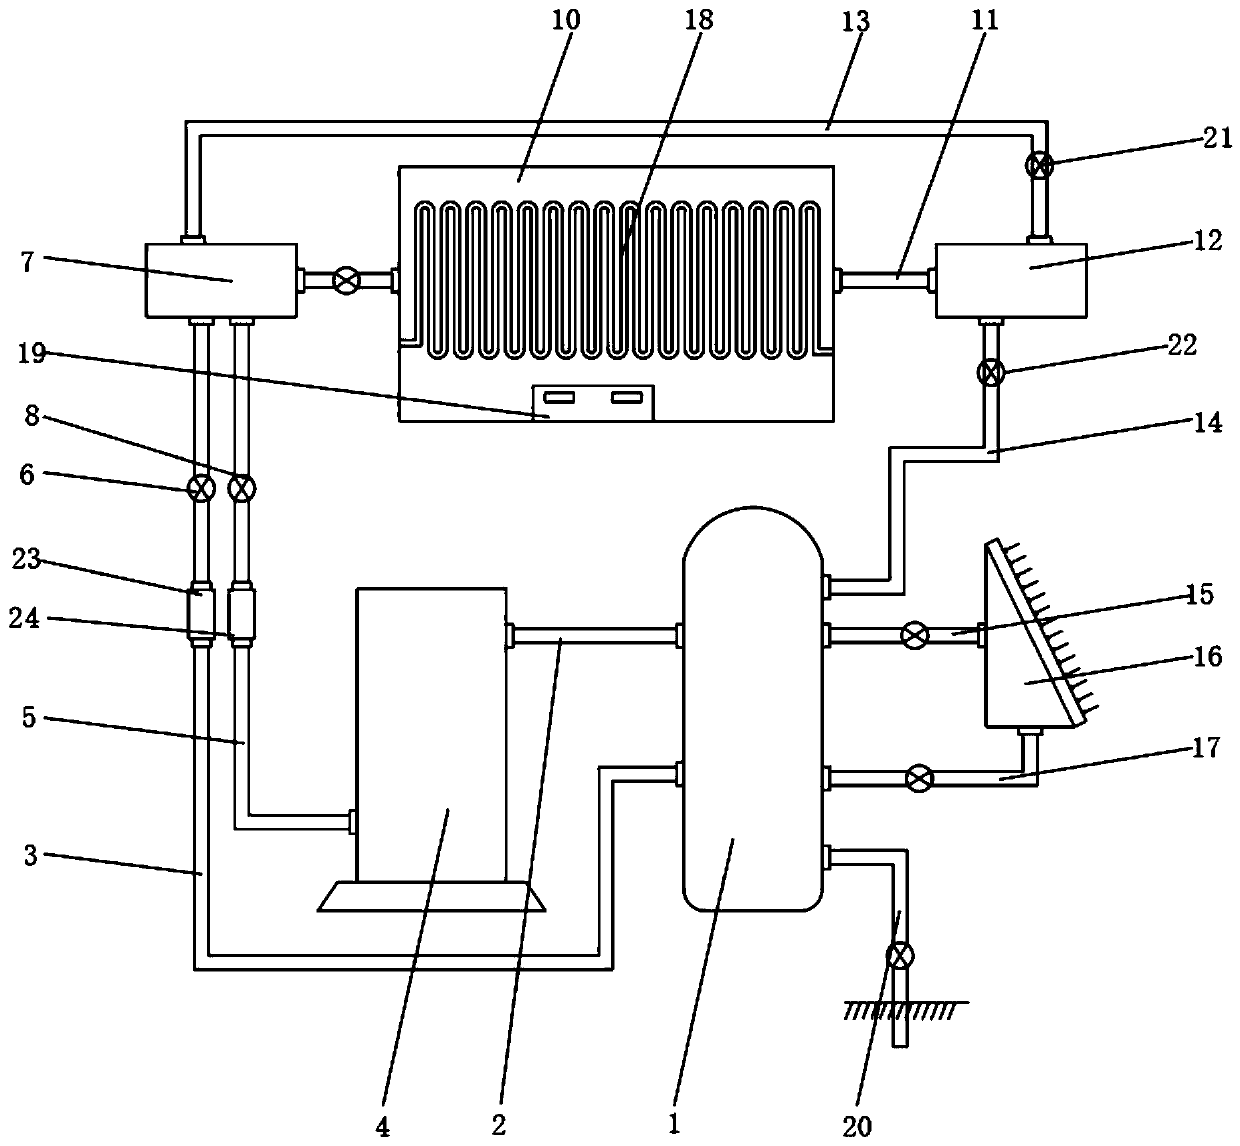 Novel heat pump system for heating ventilation air conditioning engineering